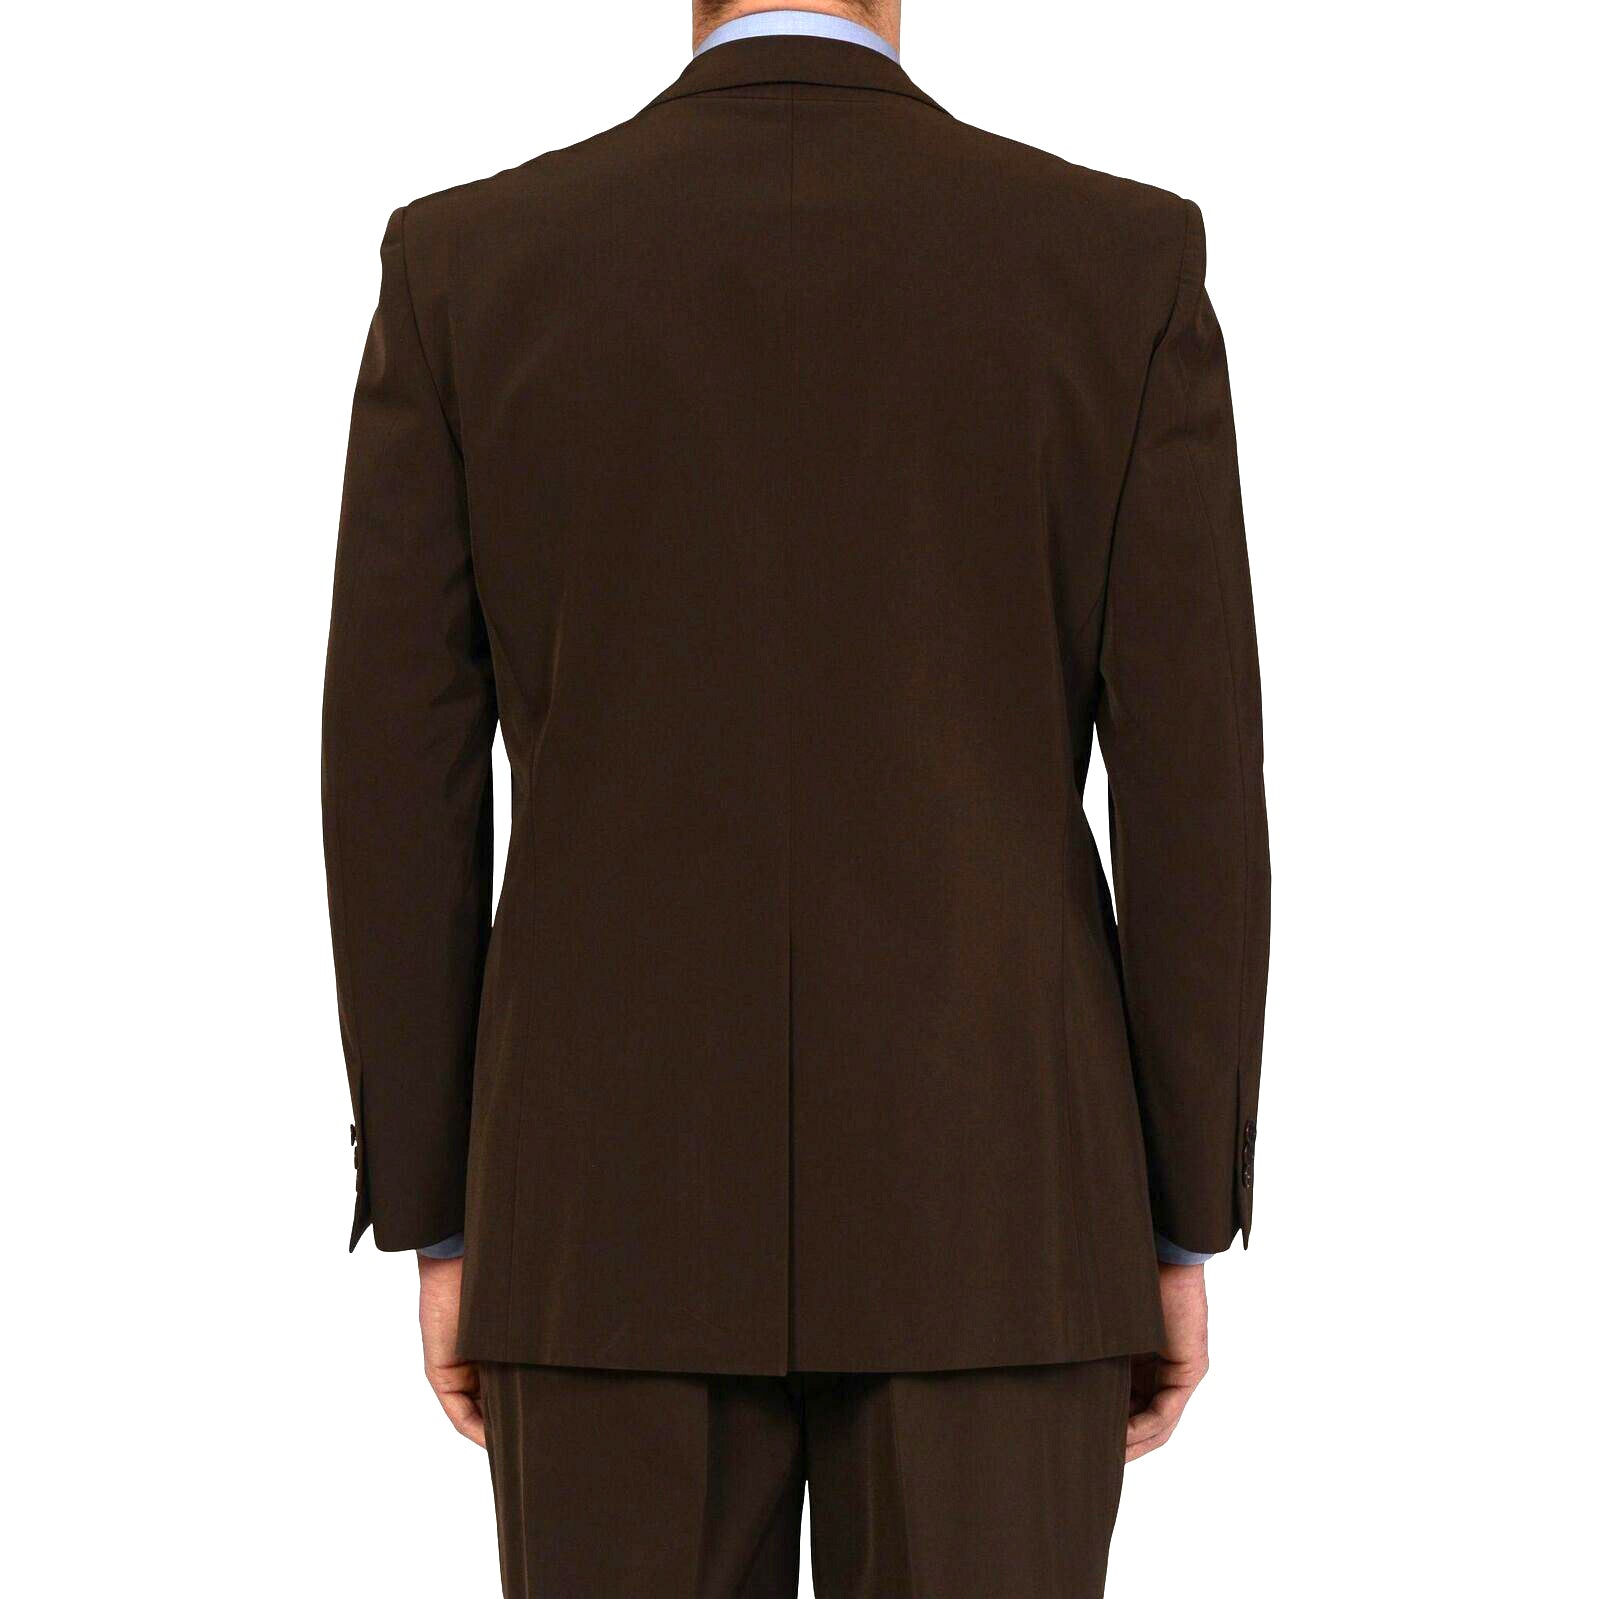 D'AVENZA Roma Handmade Brown Polyester Suit EU 52 NEW US 42 D'AVENZA